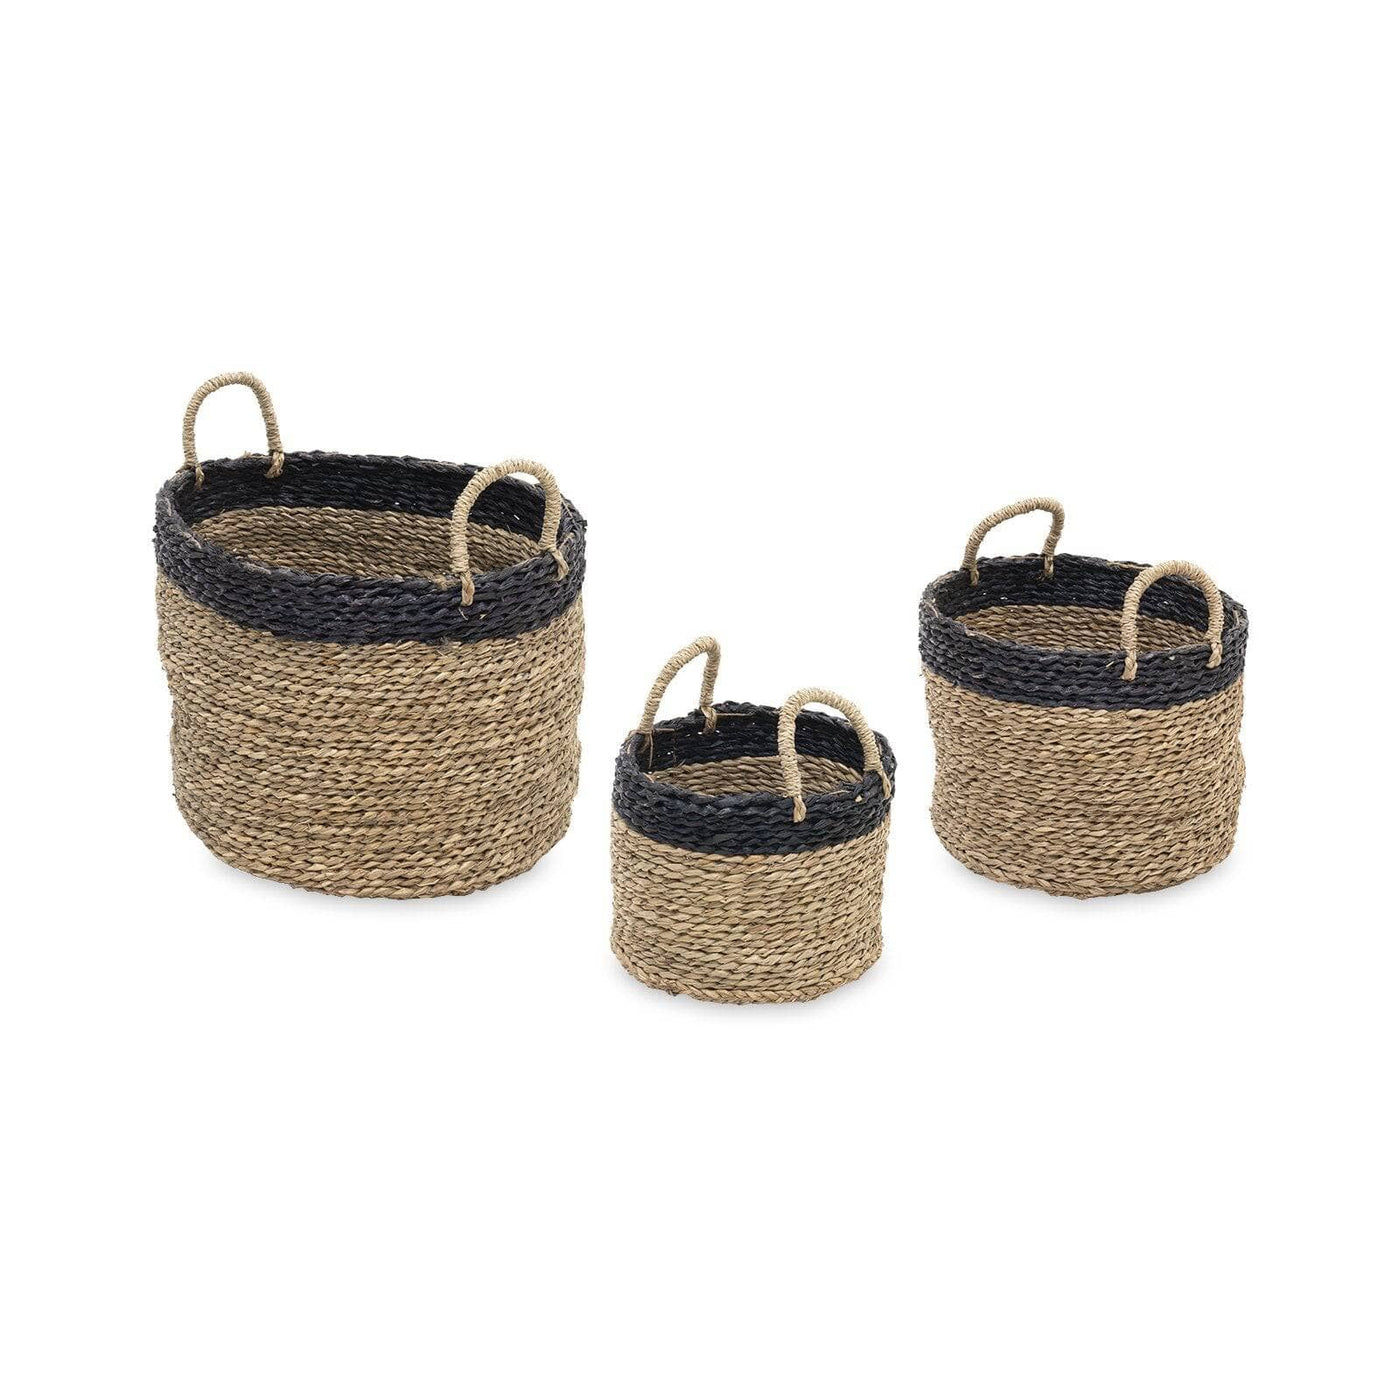 Norman Seagrass Basket, Natural, M - 2